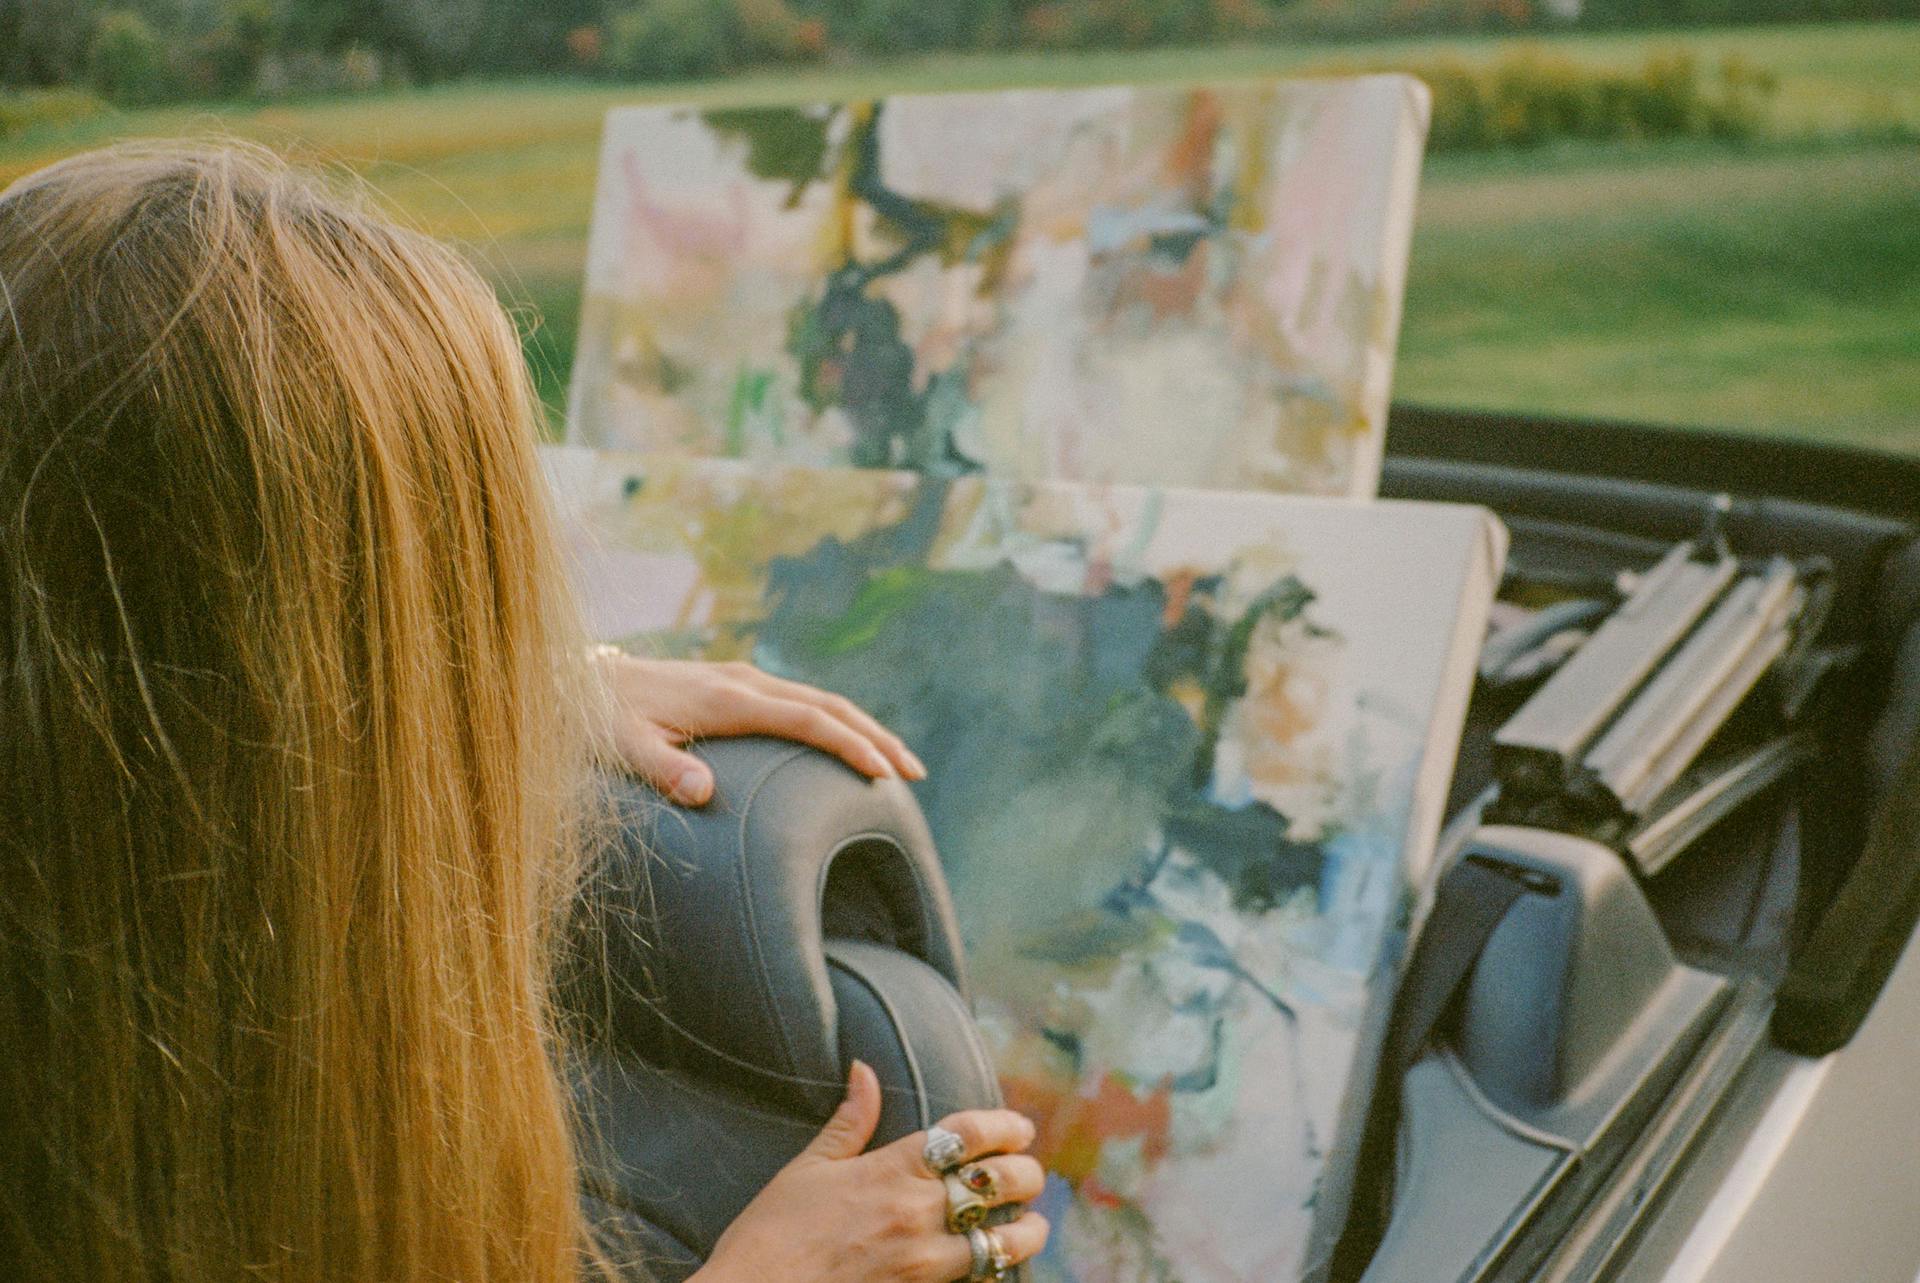 A woman looks at art that's in the backseat of a car